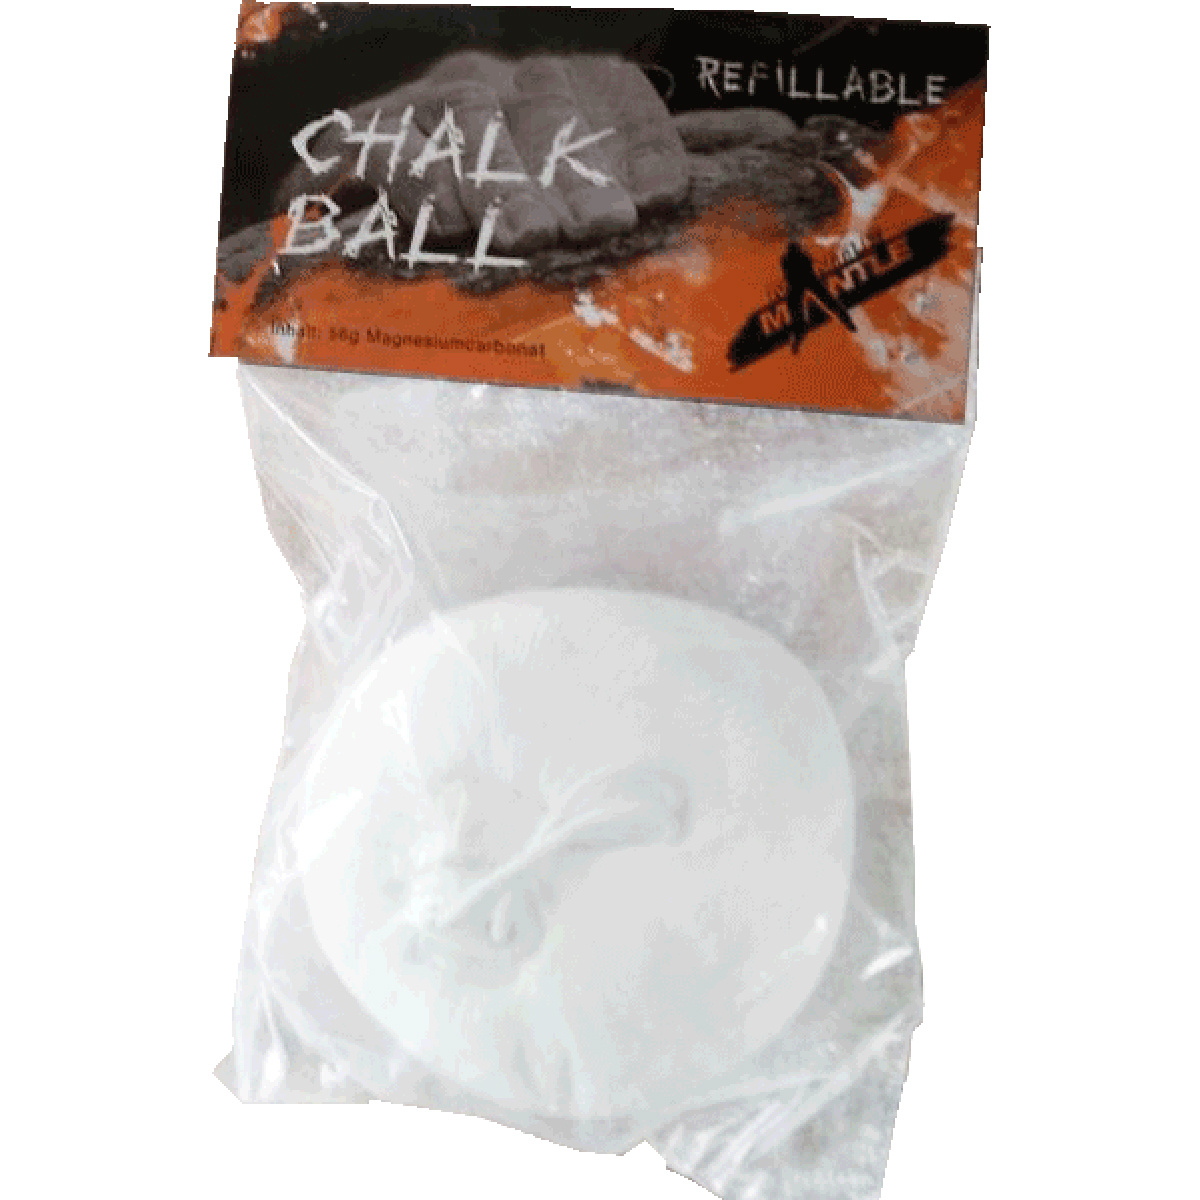 Image of Mantle Chalk Ball refillable 56 g